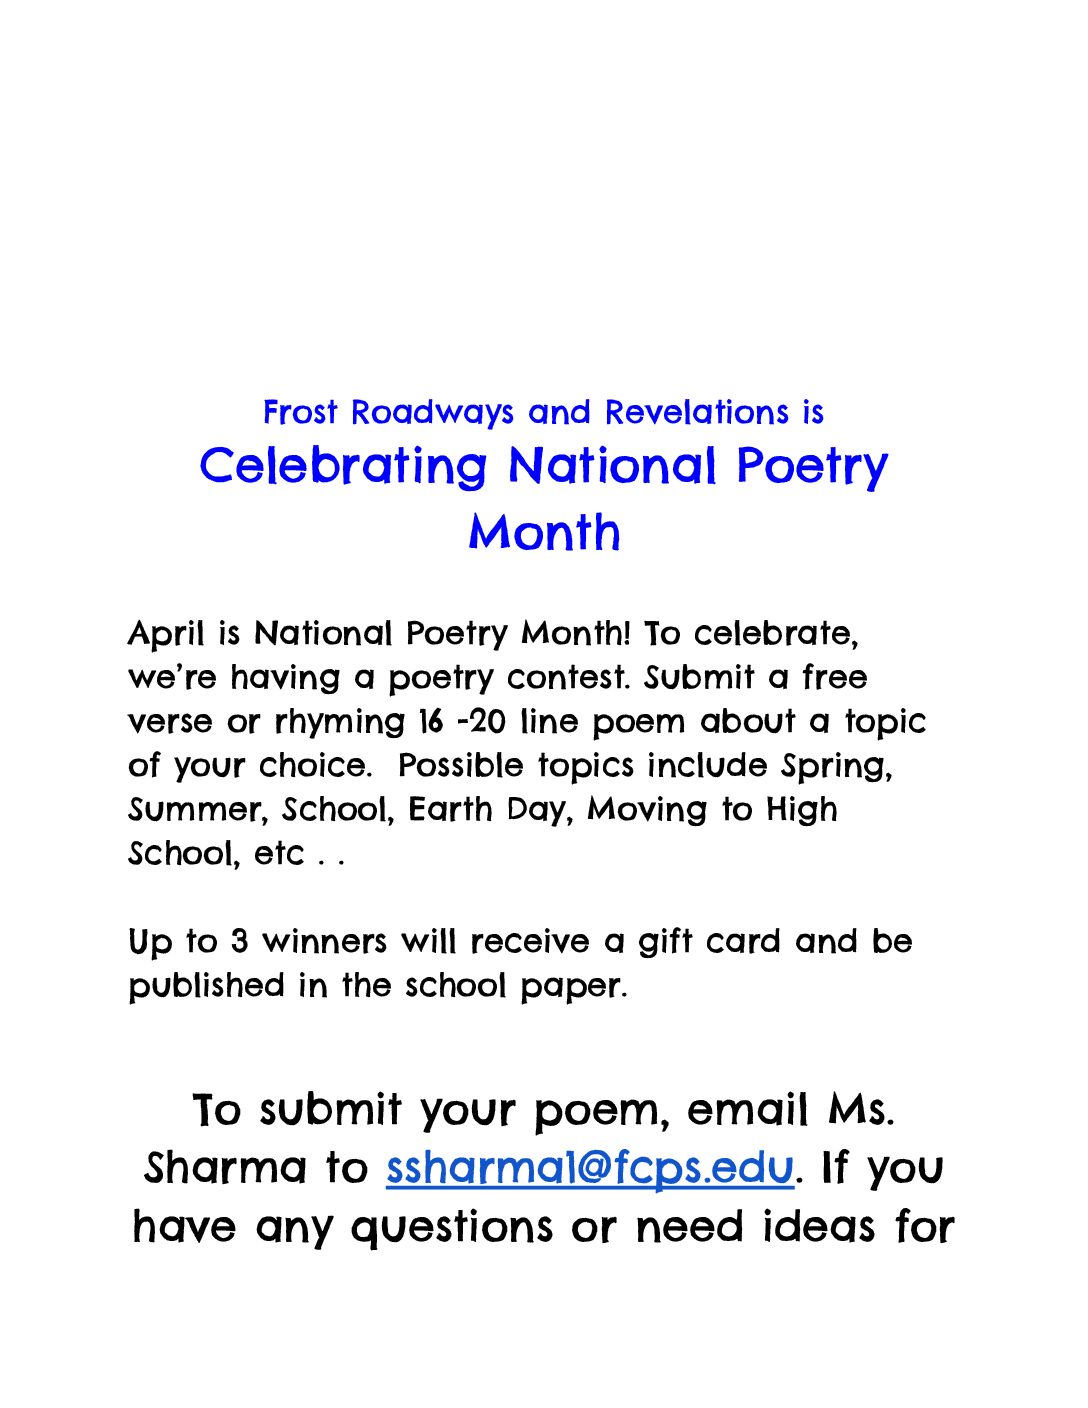 Celebrating National Poetry Month!